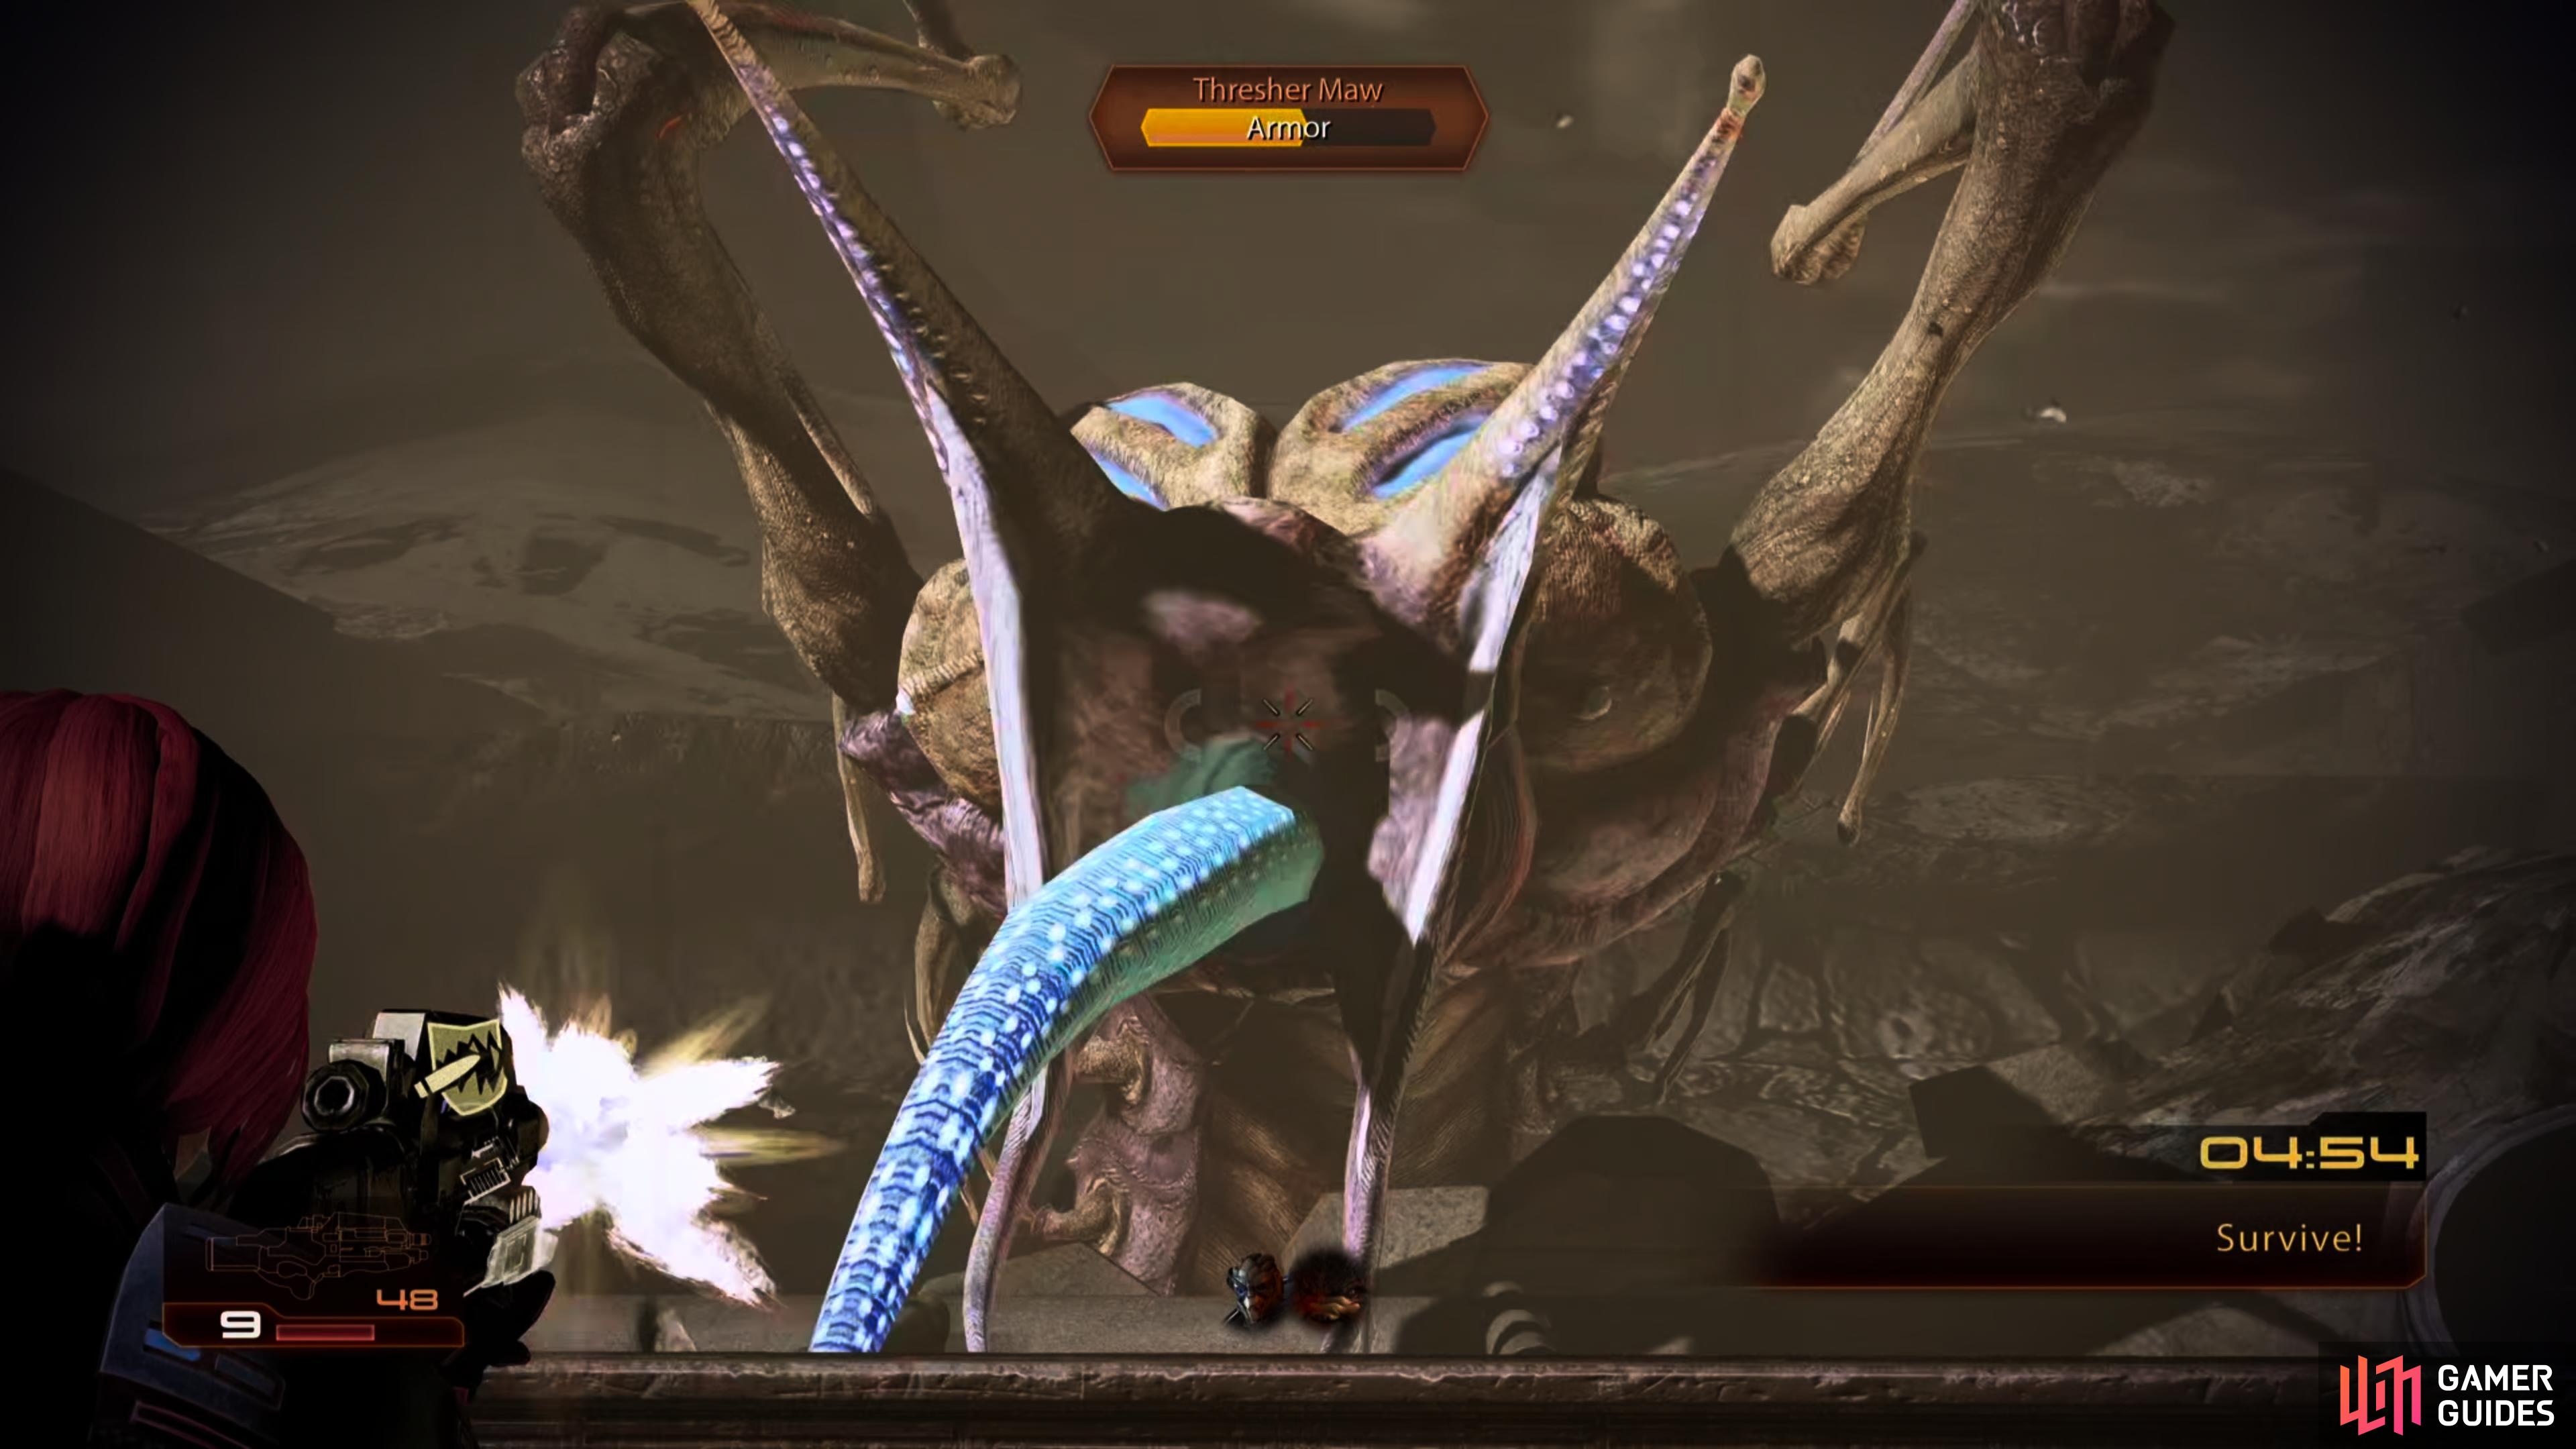 Riddle the Thresher Maw with bullets from behind cover,